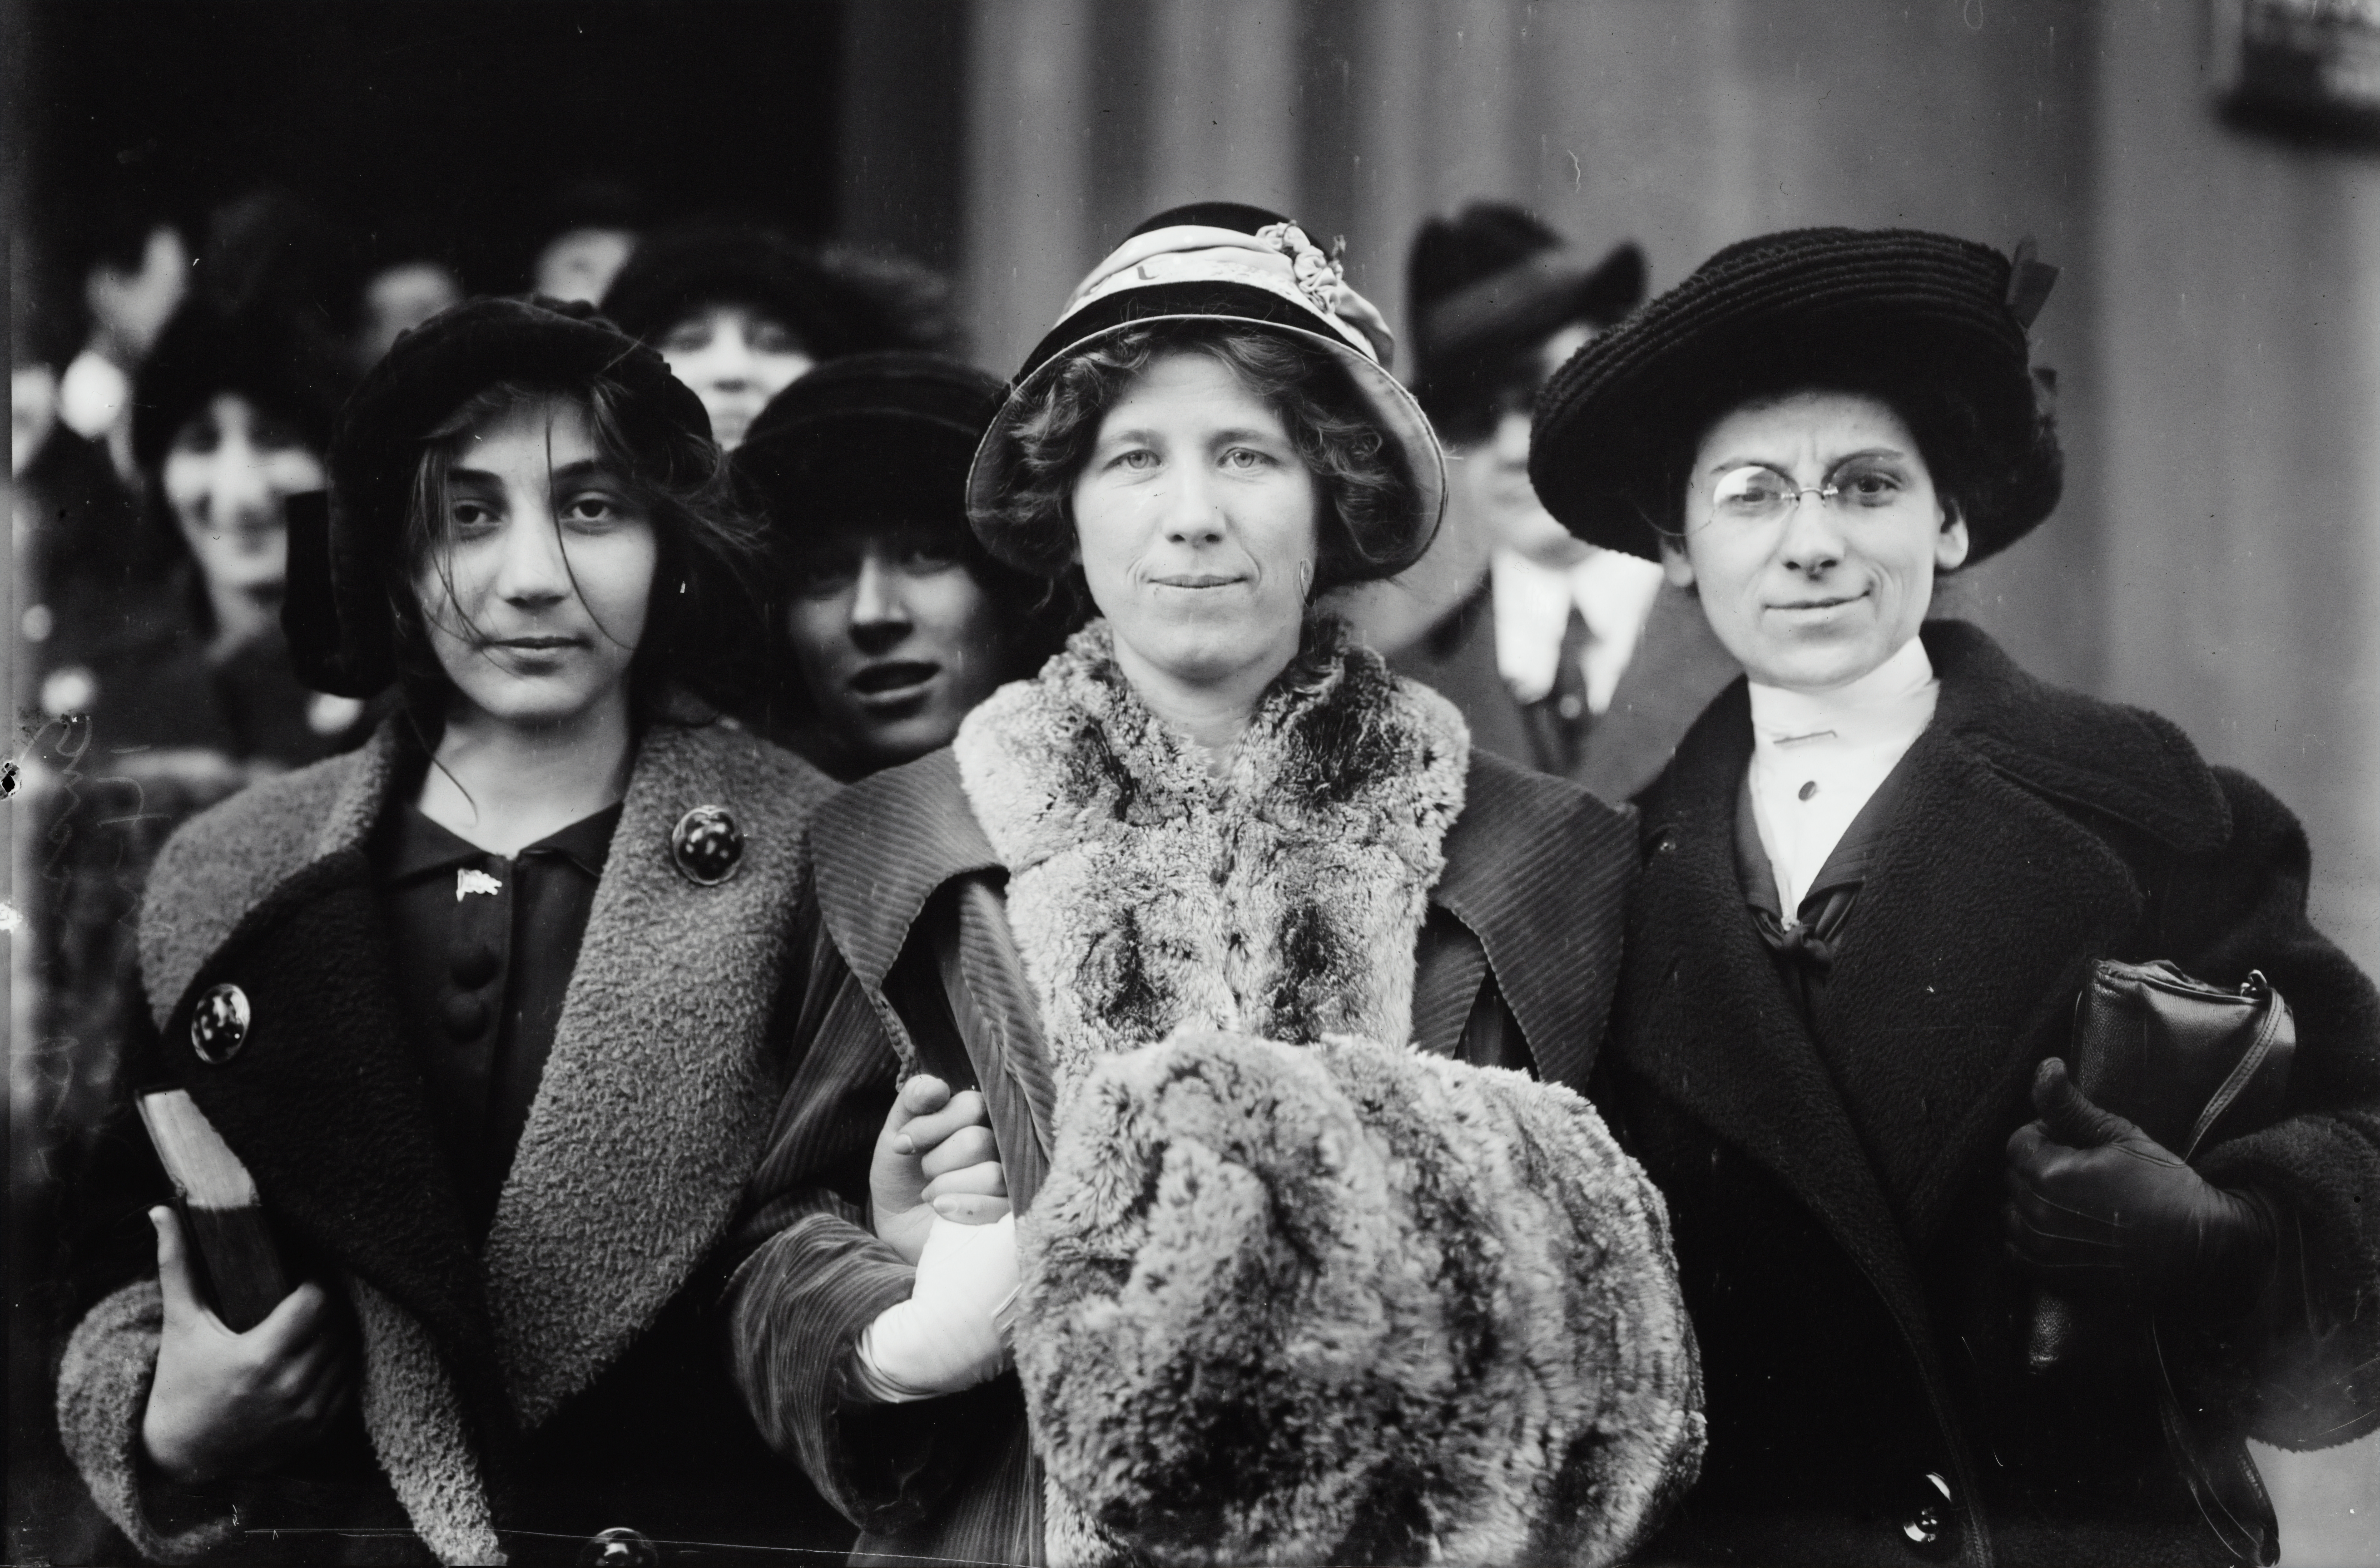 The 19th Amendment: 100 Years Later